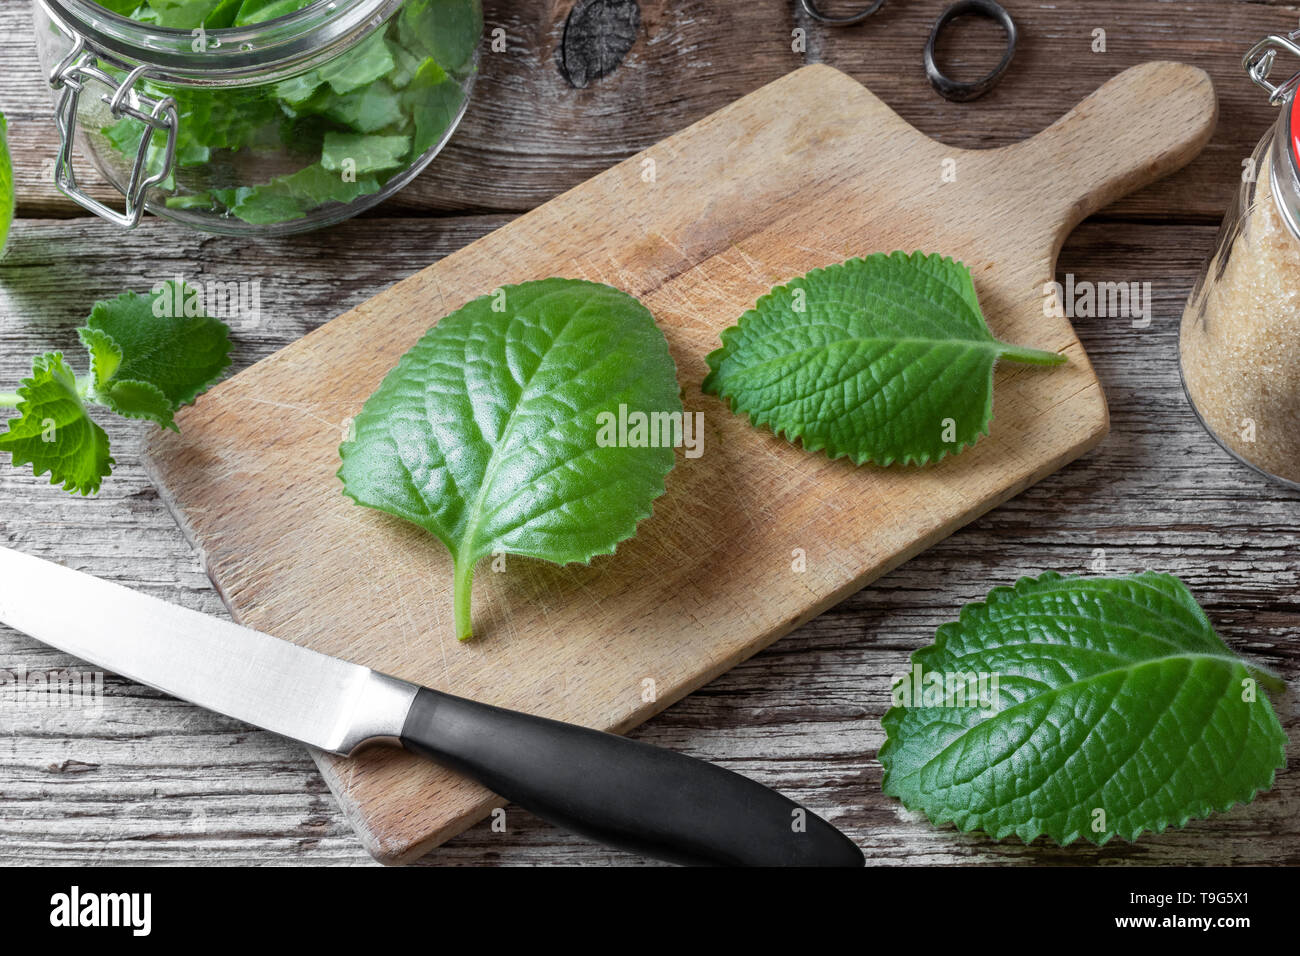 Cutting up fresh silver spurflower to prepare herbal syrup against common cold Stock Photo